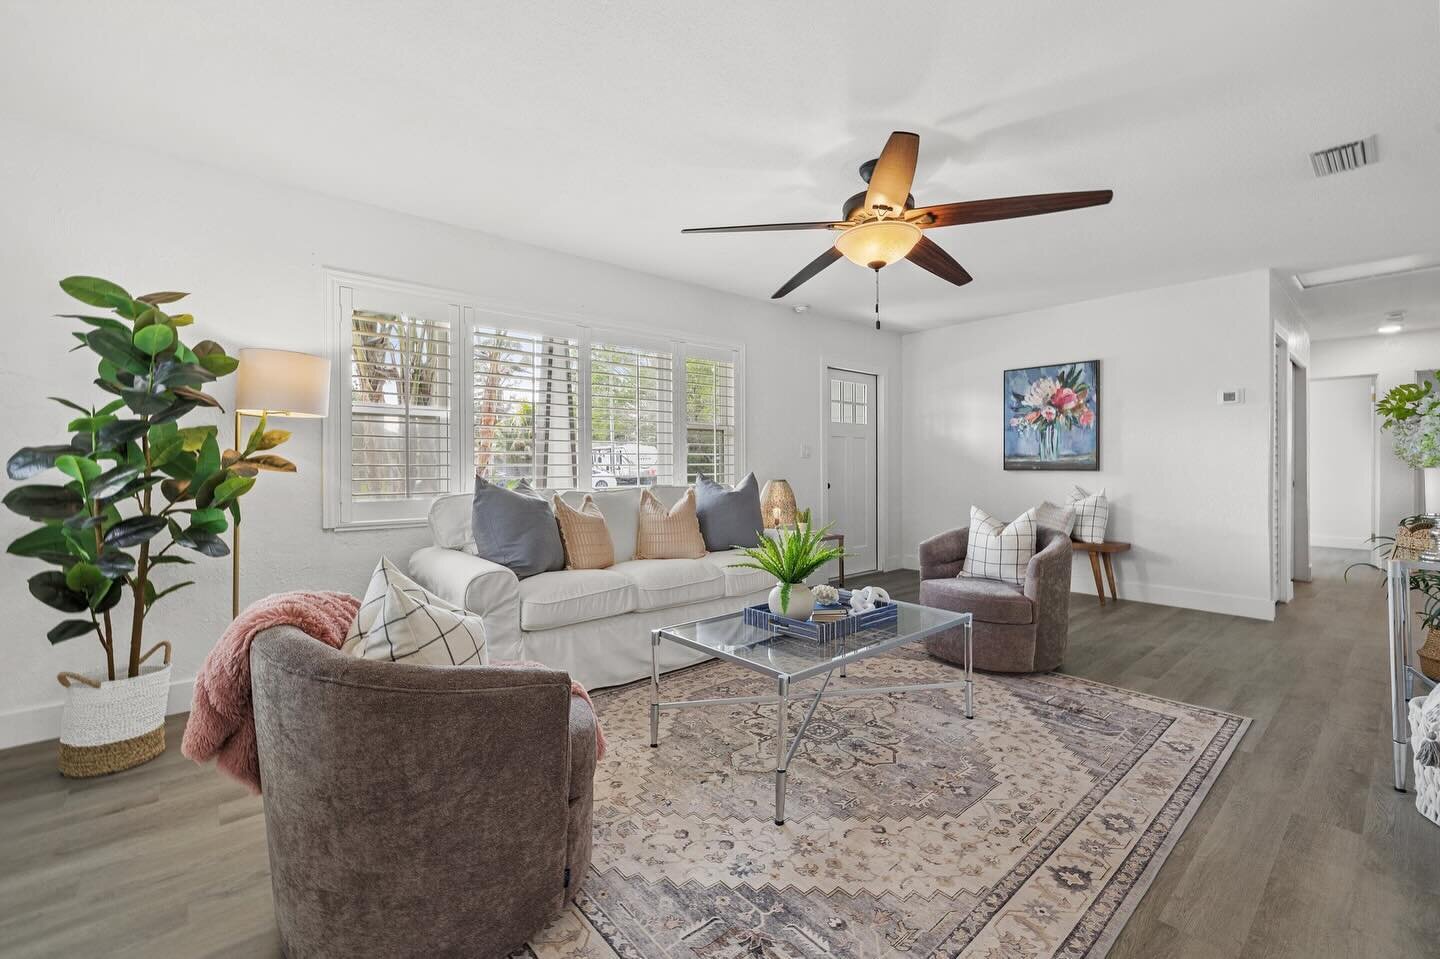 She is beauty, she is grace, she is for sale in beautiful Shore Acres. 😍🌴
.
.
.
.
.
.
.
.
.
.
#arochicstaging #homestagingworks #homesweethome #forsale #floridalife #floridarealestate #arochicdesign #stpetersburgflorida🌴 #stpetersburgrealestate #r